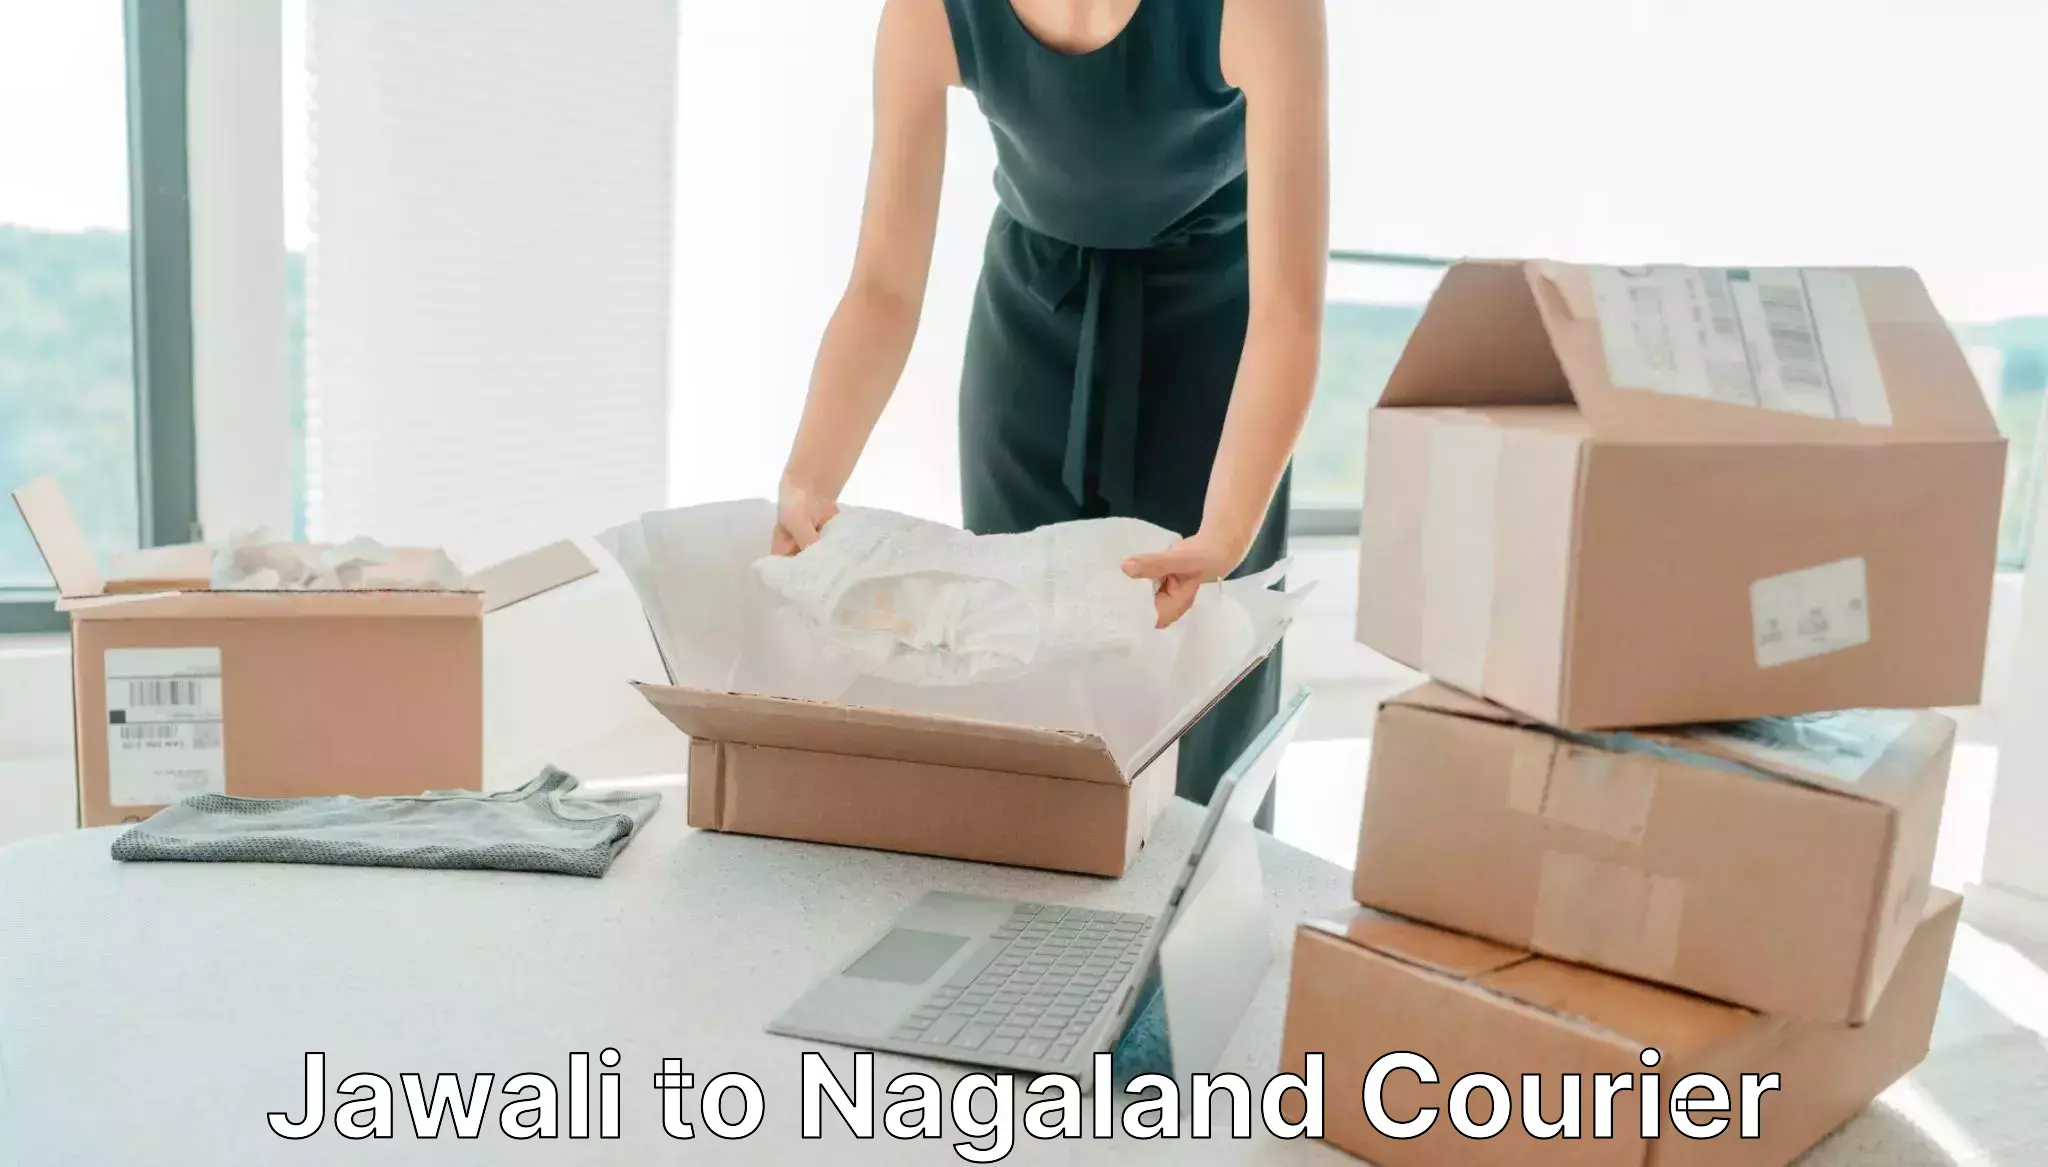 Customizable delivery plans Jawali to Nagaland